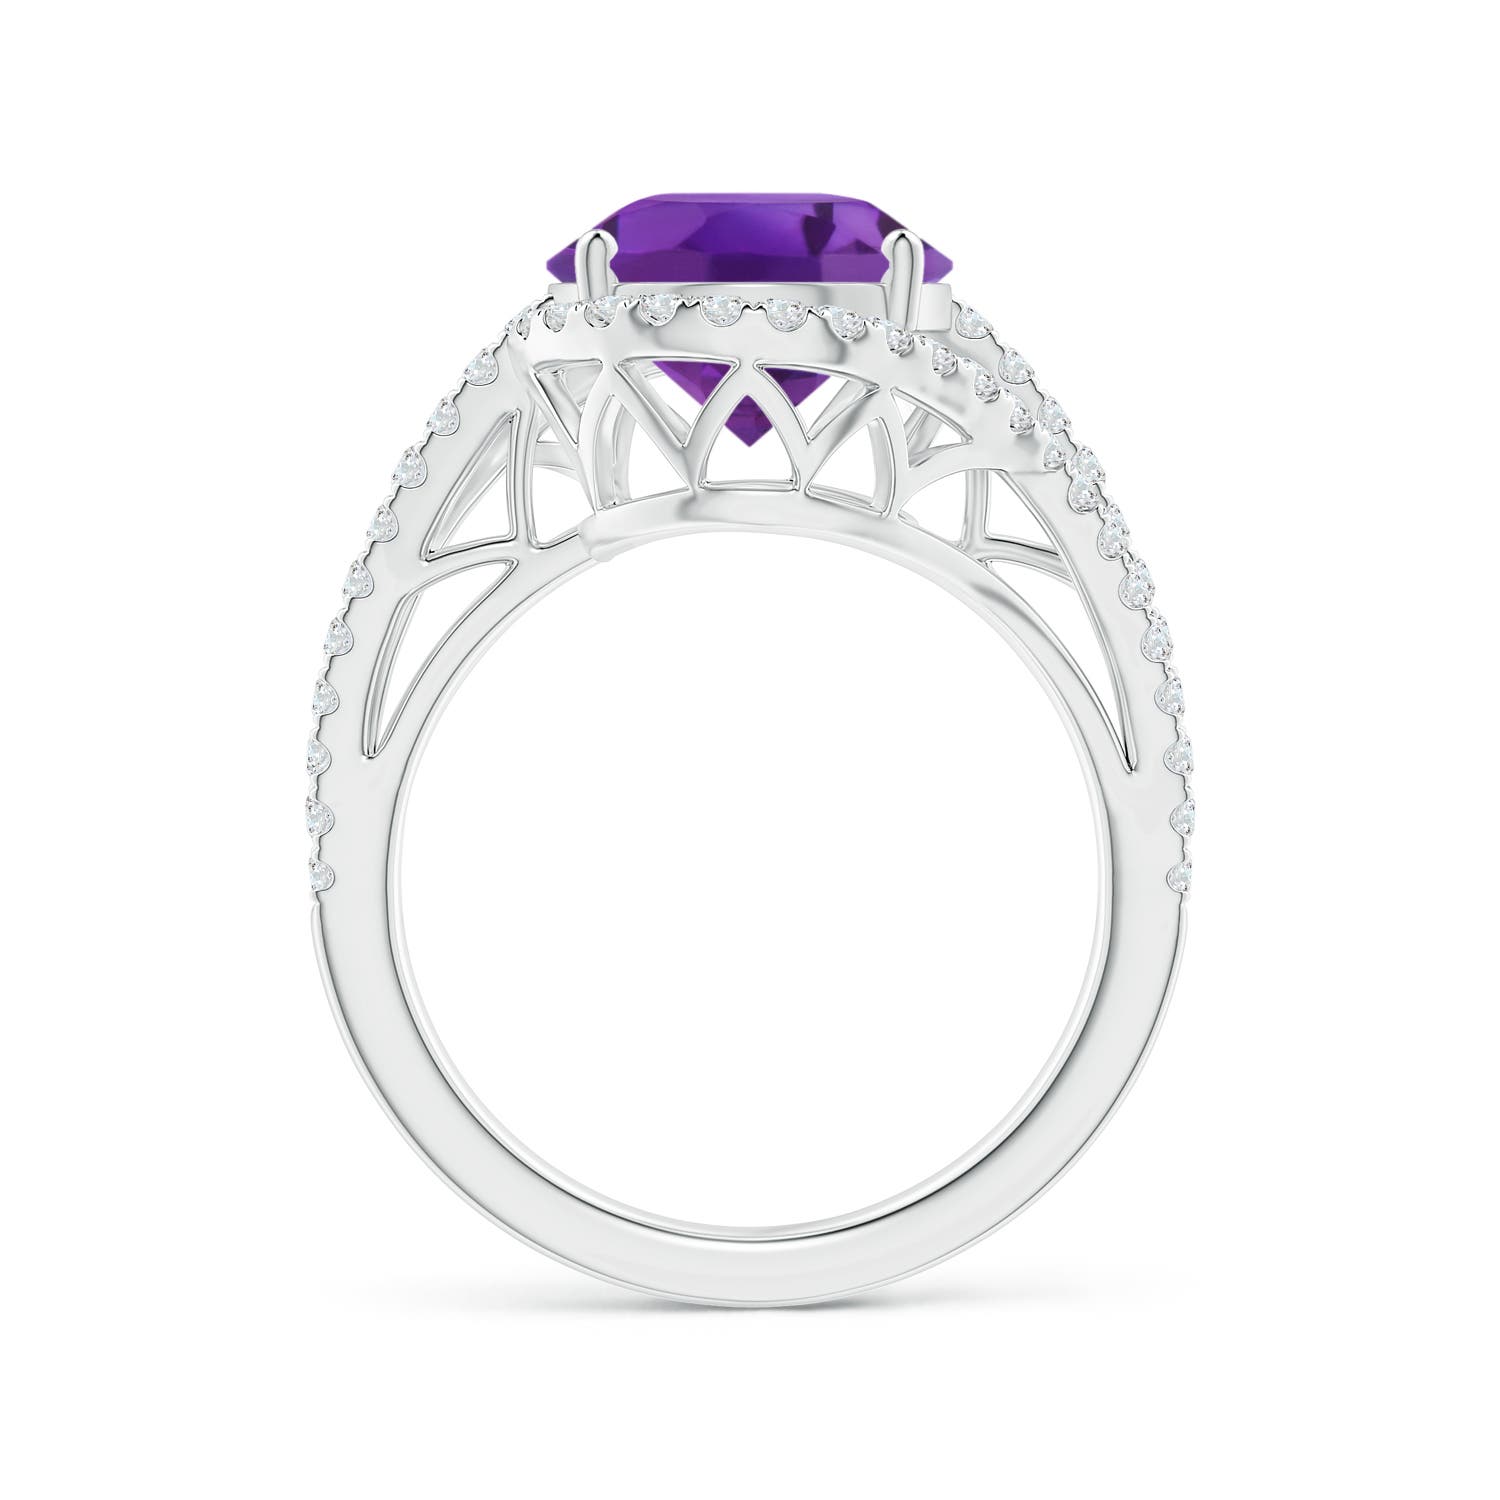 AAA - Amethyst / 4.92 CT / 14 KT White Gold